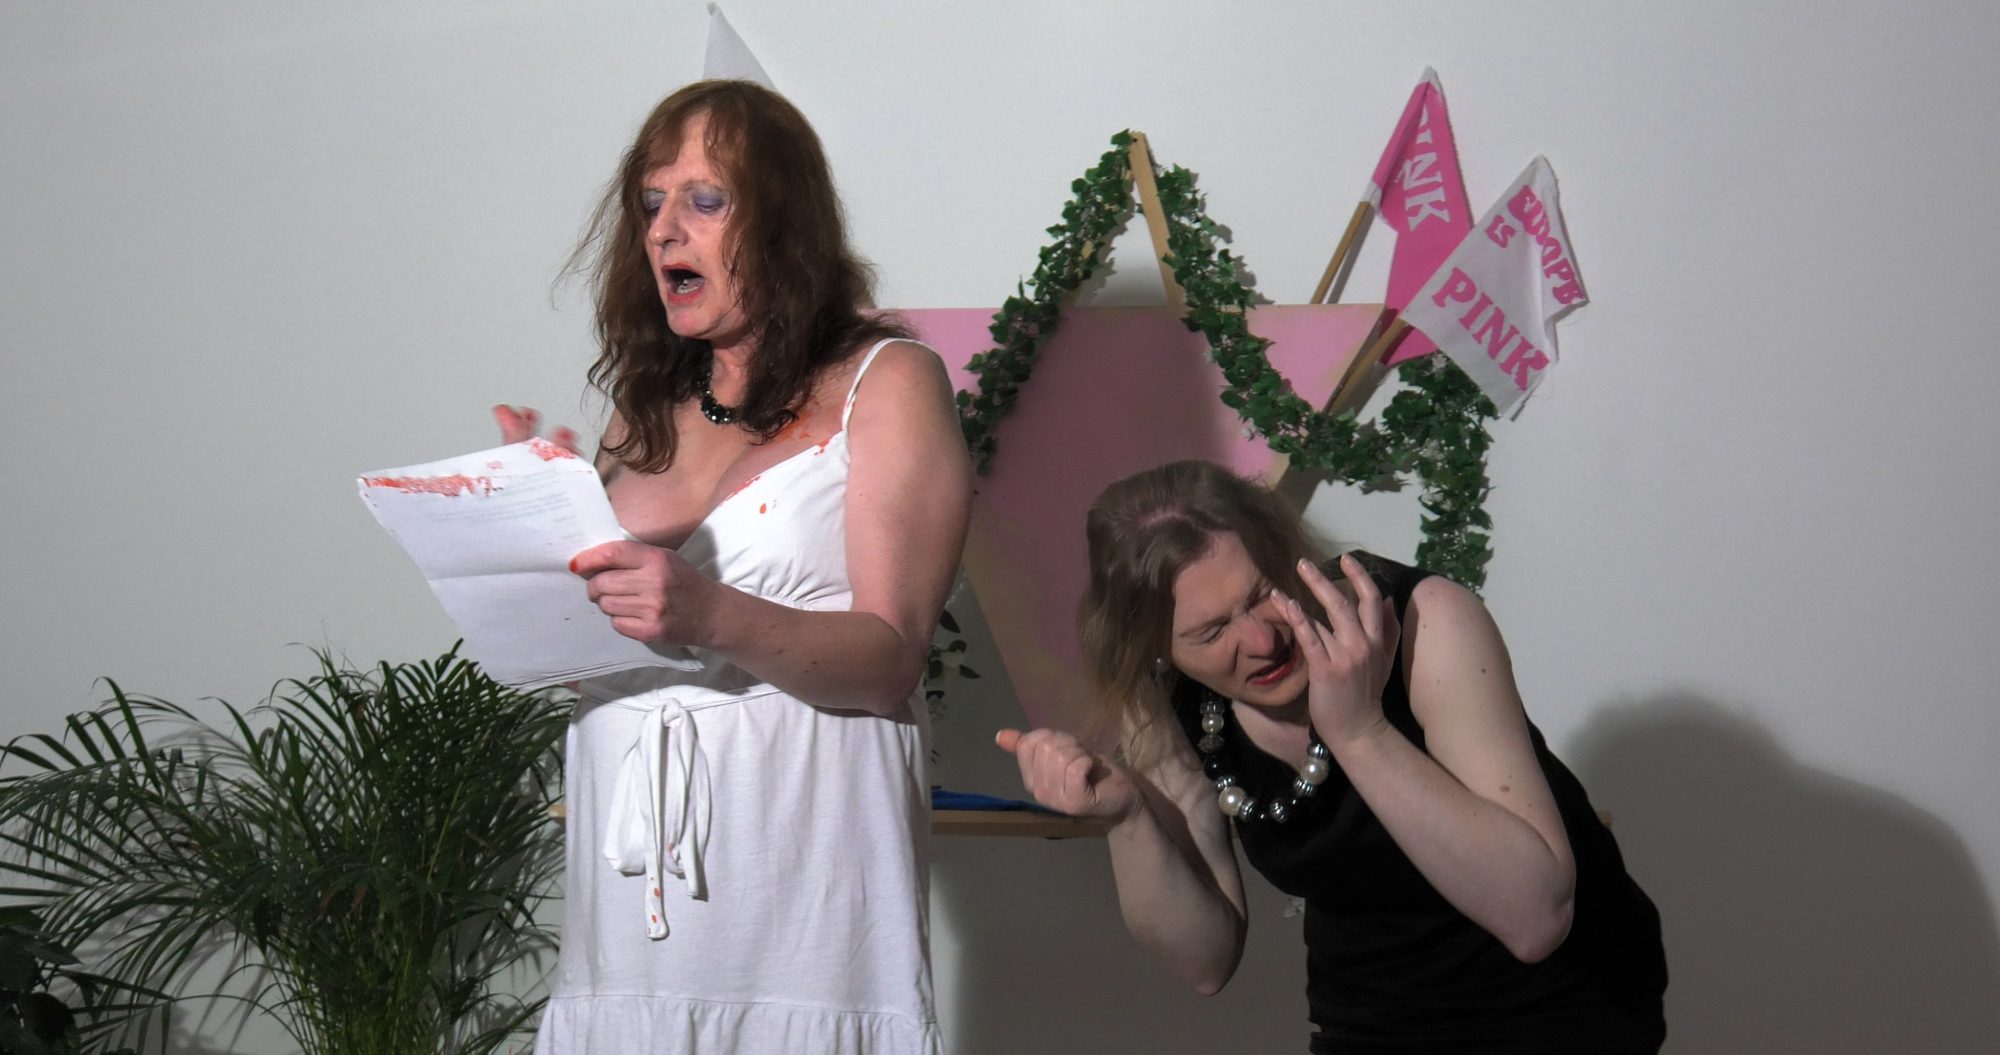 A woman in a white dress reads from paper while another woman in a black dress touches her face and grimaces